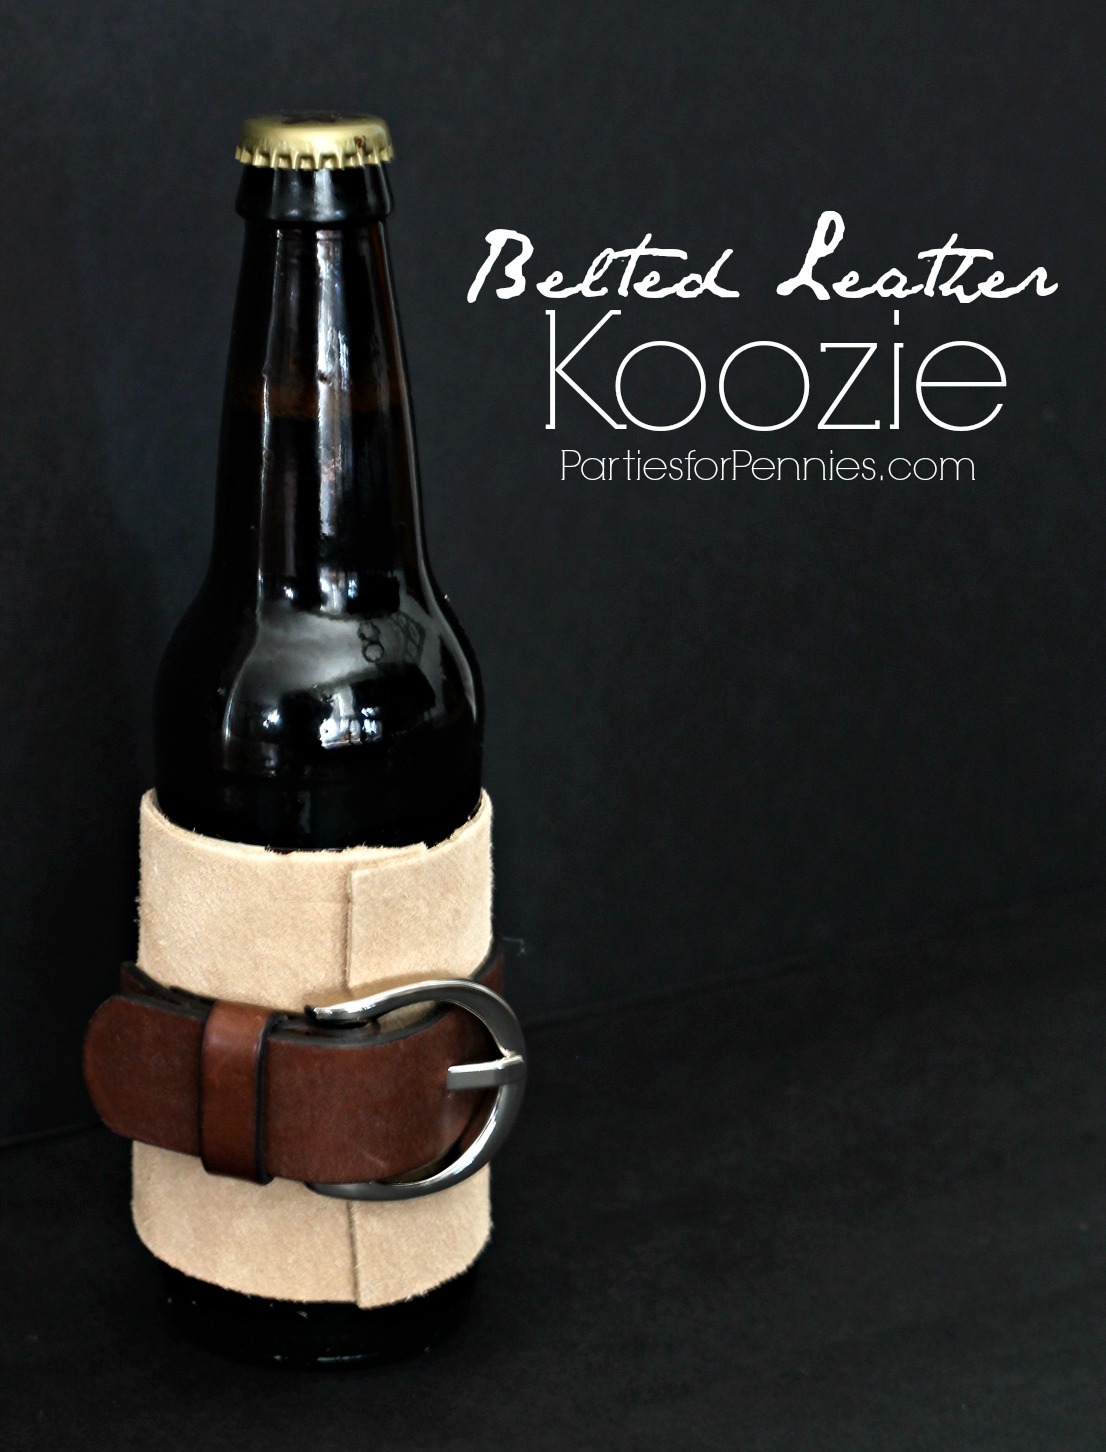 Beer & Bacon Superbowl Party - belted leather kookie by PartiesforPennies.com